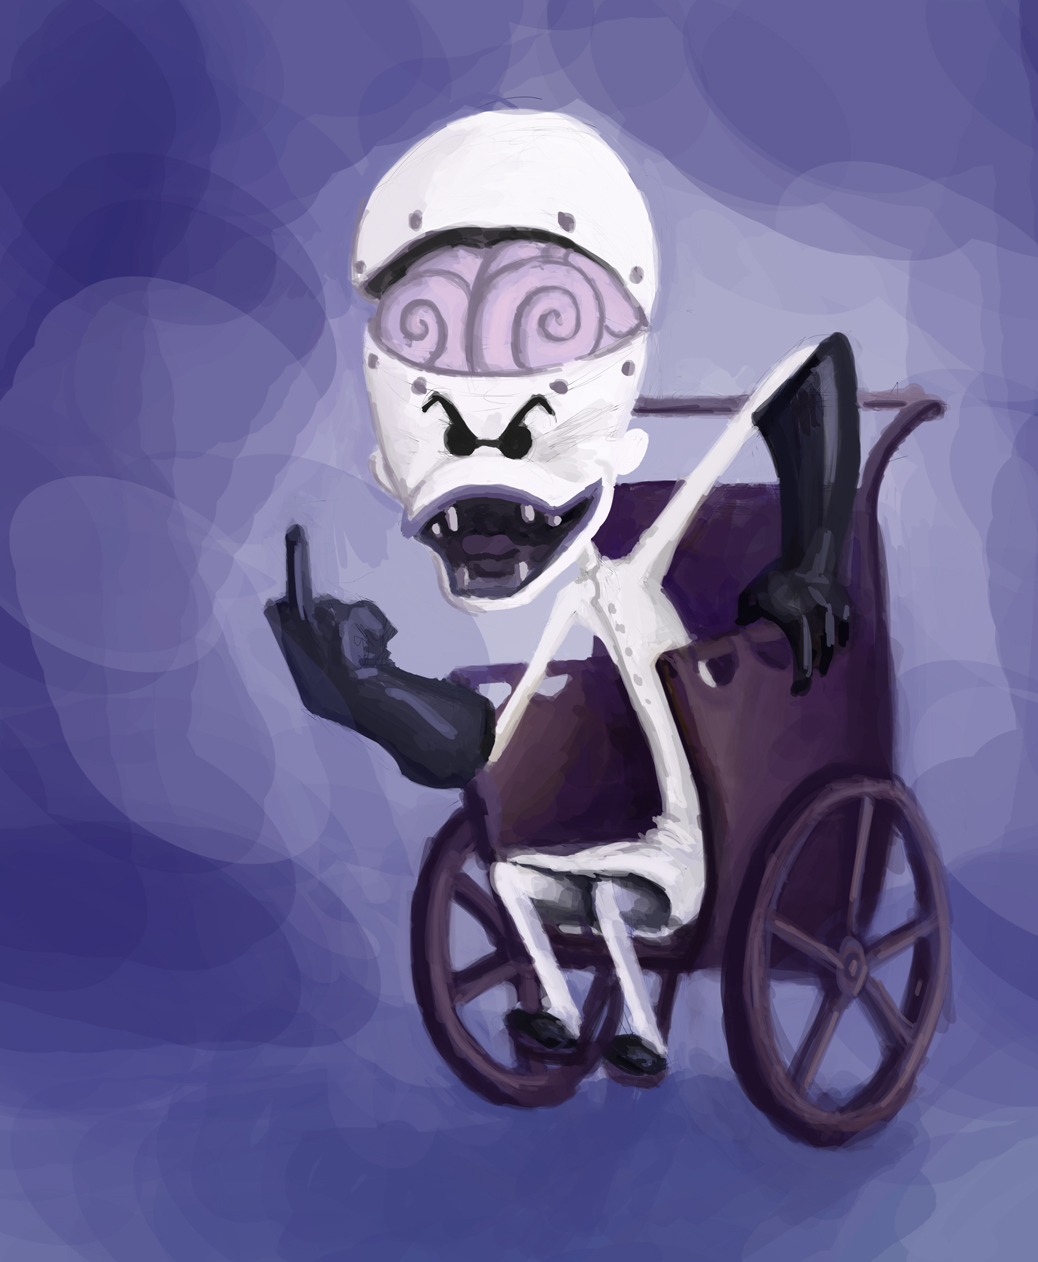 PC Illustration Quest: the Nightmare Before Christmas: Dr. Finklestein